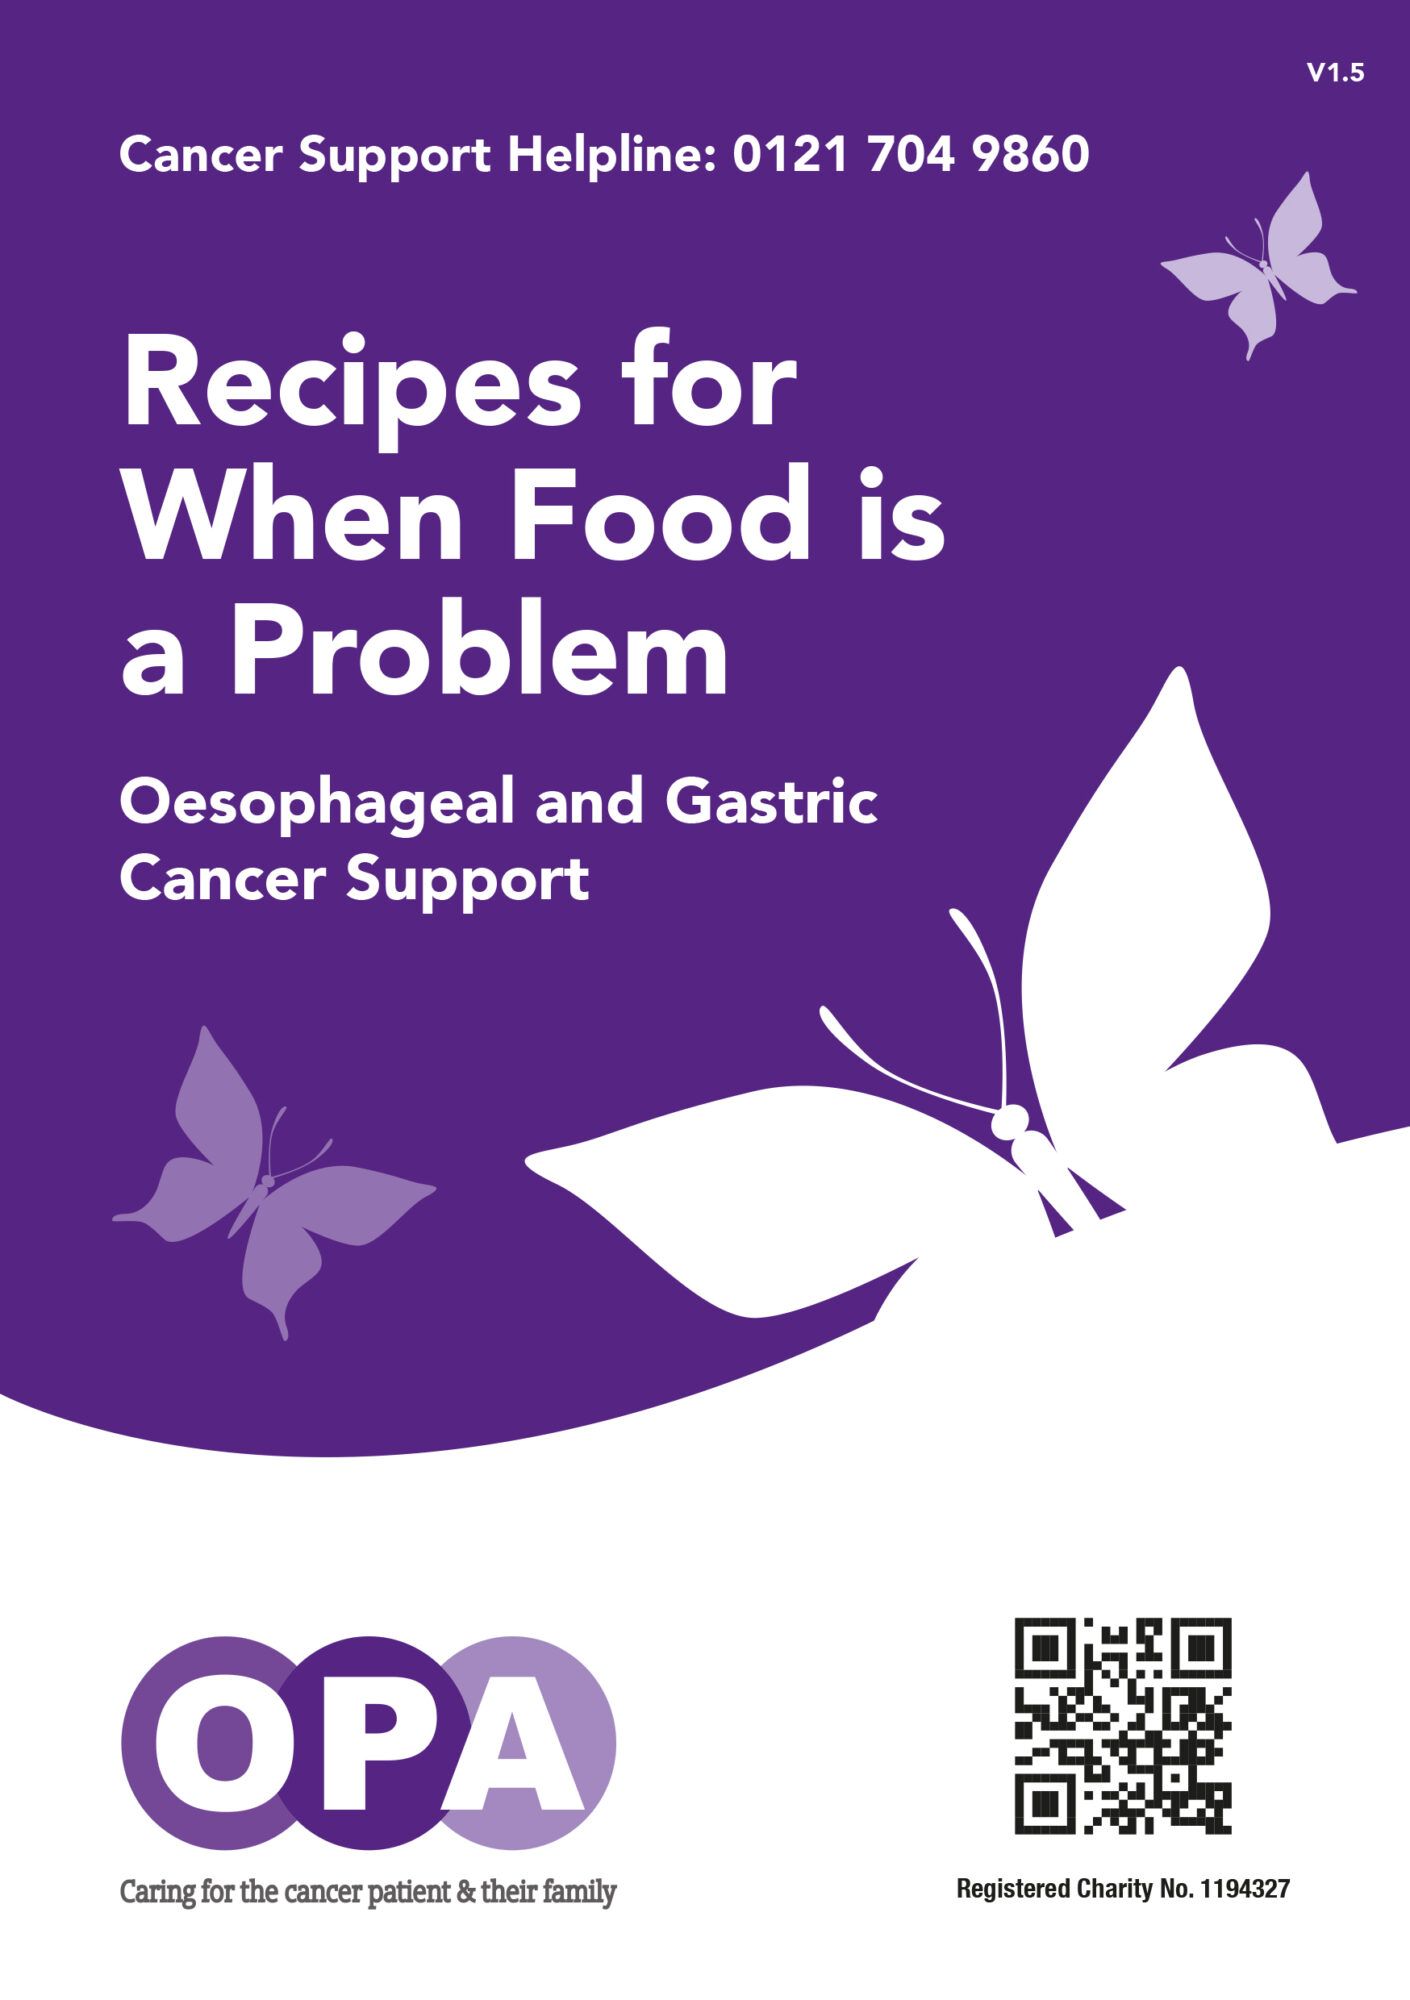 OPA Recipes for When Food is a Problem